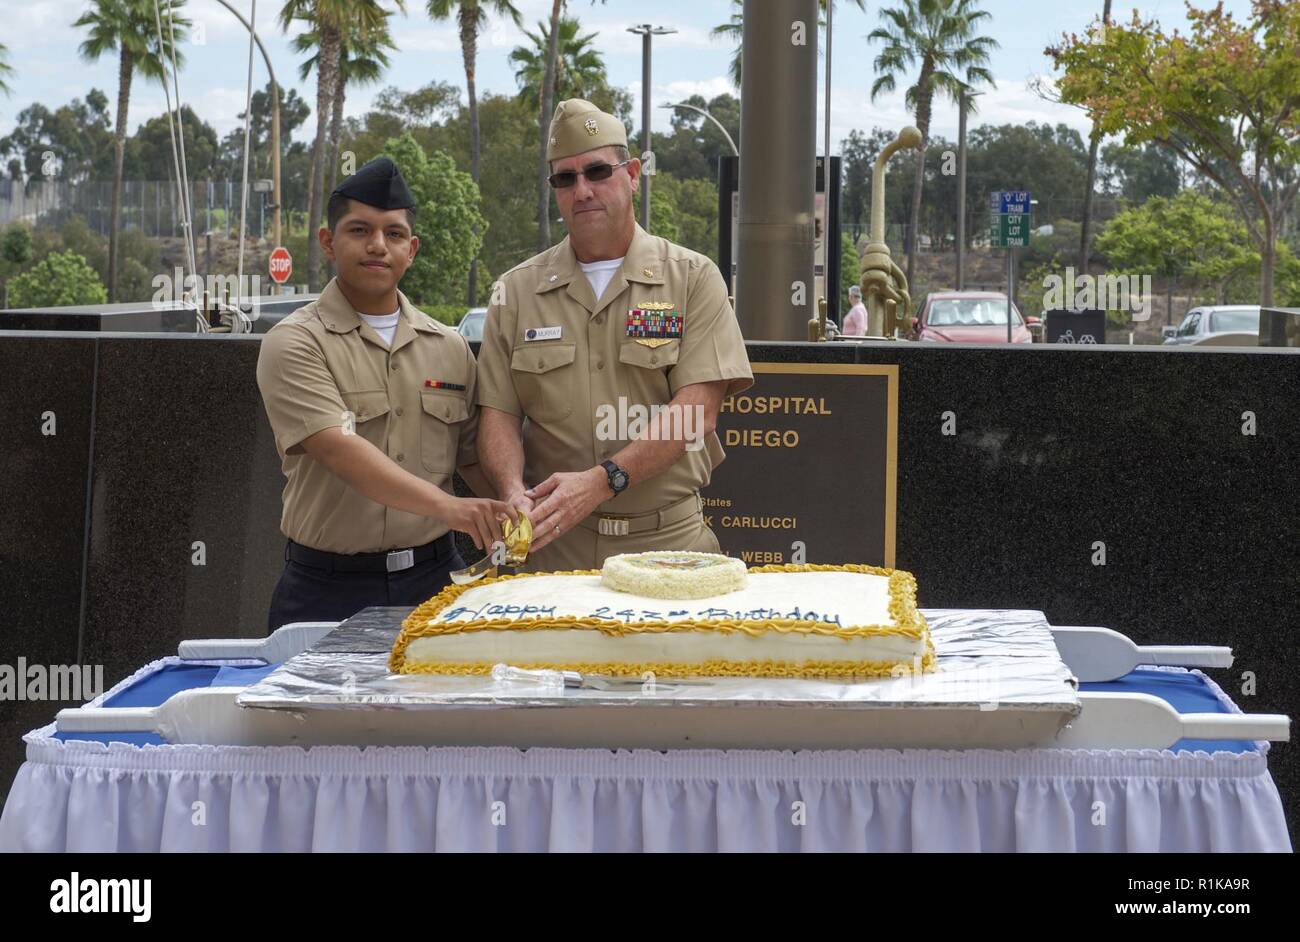 SAN DIEIGO (Oct. 12,2018) — Cmdr Michael Murry, the oldest Sailor present, and Hospitalman Apprentice Lopez cut the cake during Naval Medical Center San Diego (NMCSD) celebration in the courtyard for the Navy’s 243rd Birthday. NMCSD is the largest naval hospital on the west coast, employing more than 6,000 Sailors, civilians and contractors. Stock Photo